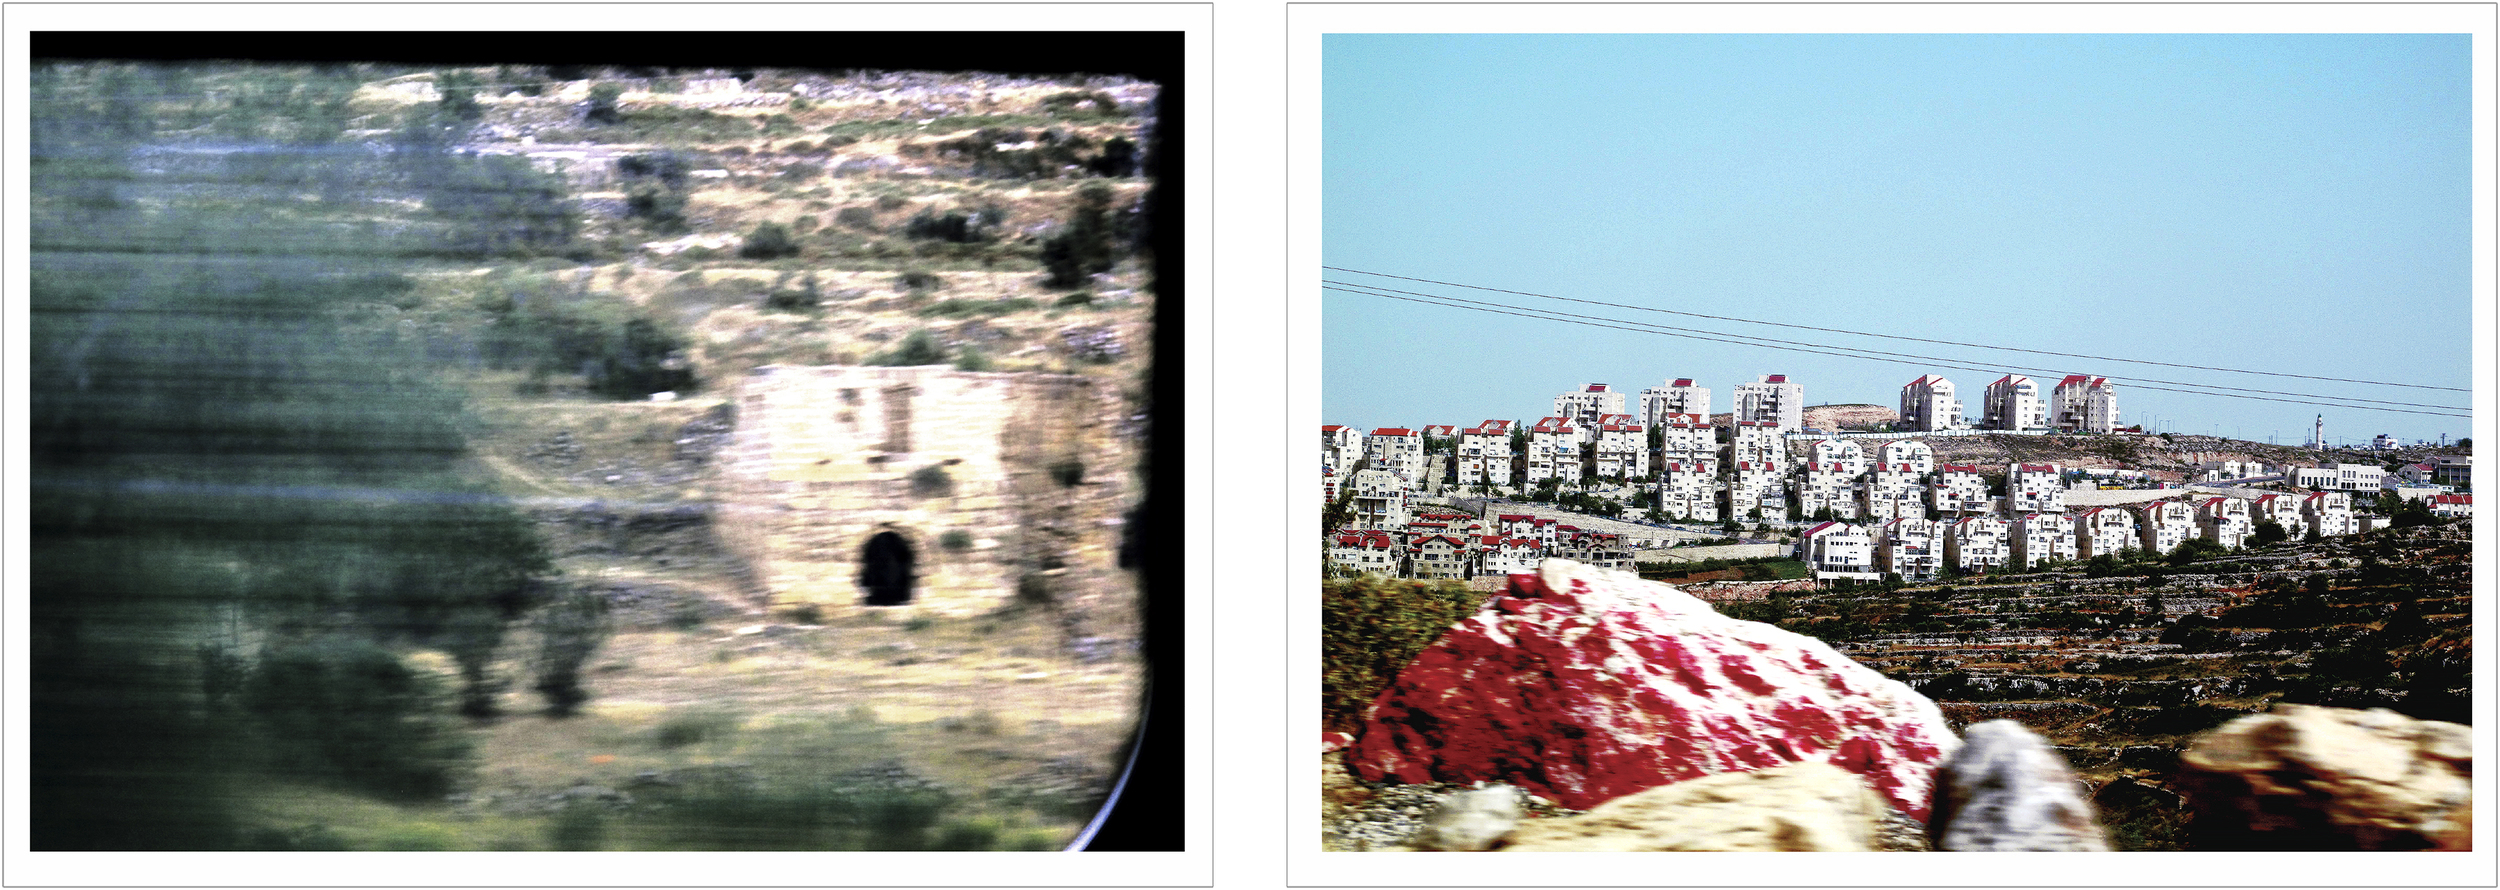  (left) 16:15, May 29, 2013 “Village Remnants: inside the Green Line, 31°49'N 34°59’E”. (right) 15:23, May 31, 2013 “Red Rock along Highway 60, Erfat Israeli Settlement", The West Bank, The Occupied Territories. 